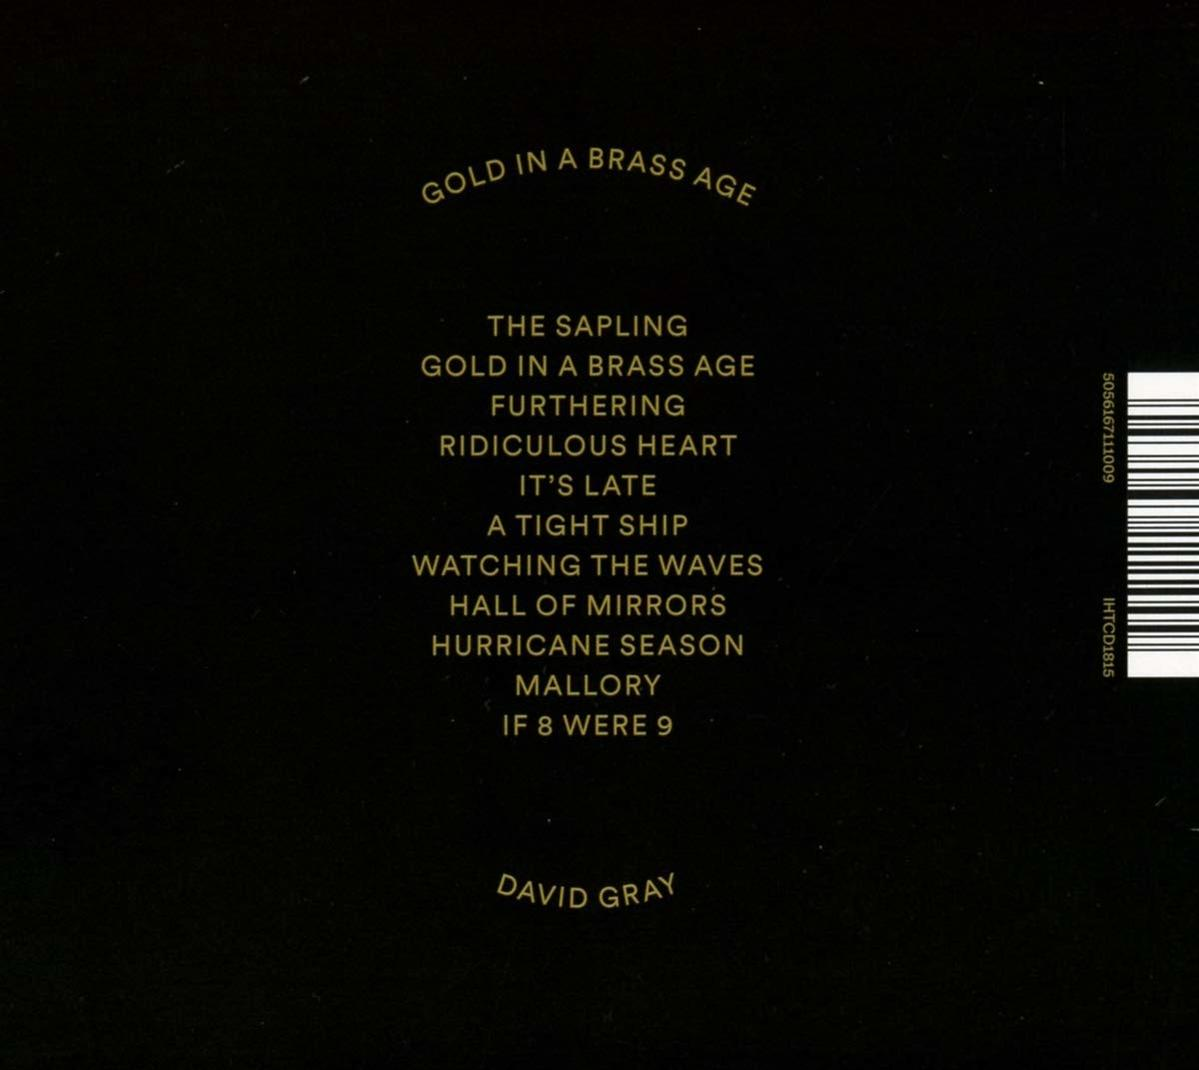 David Gray - Gold In Age Brass (CD) - A